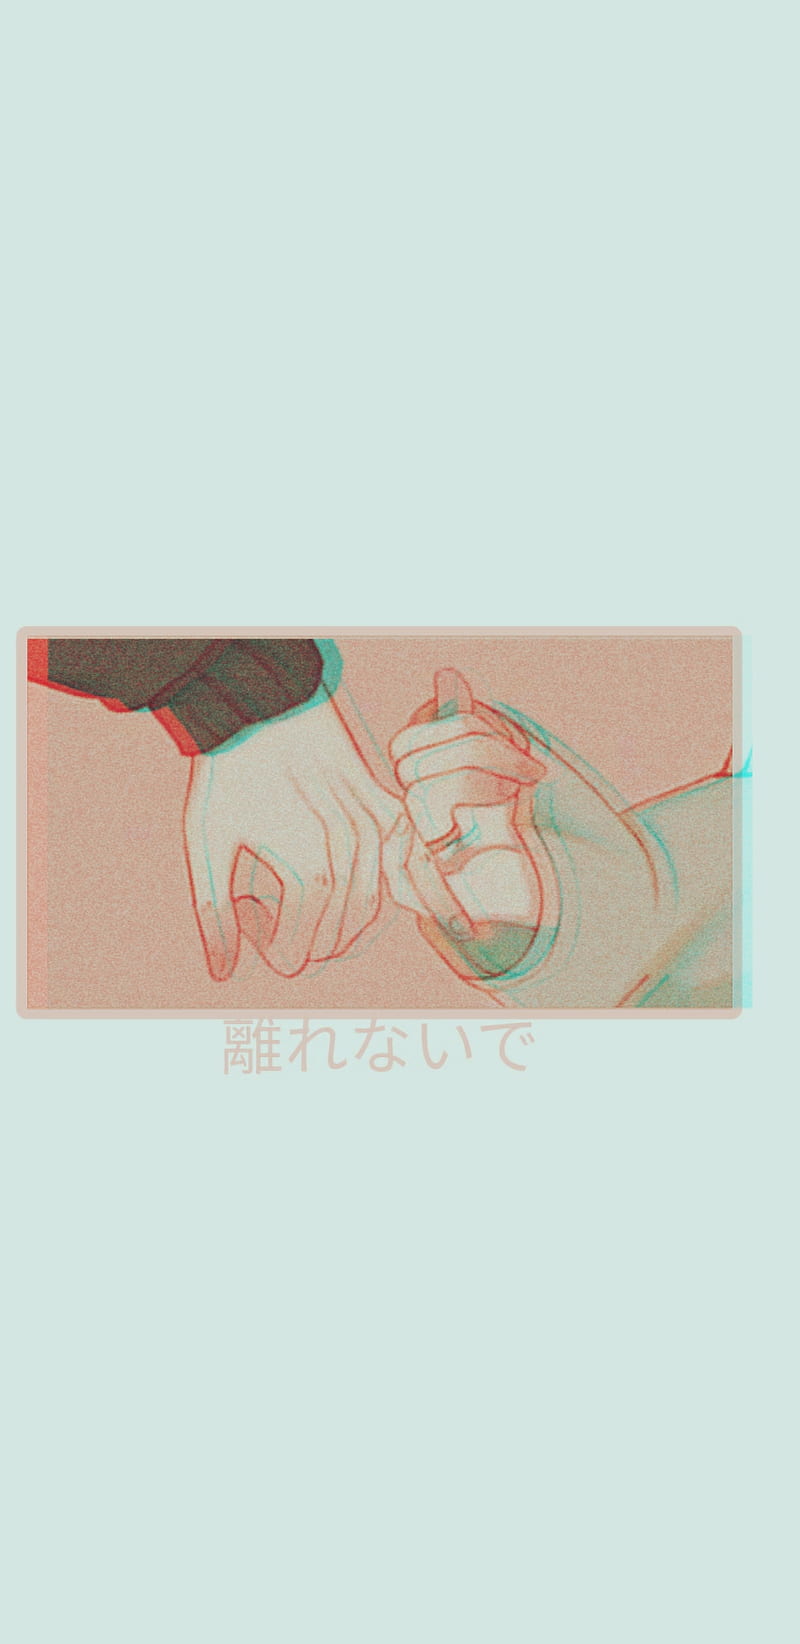 Aesthetic anime hands watercolour by anringo on DeviantArt